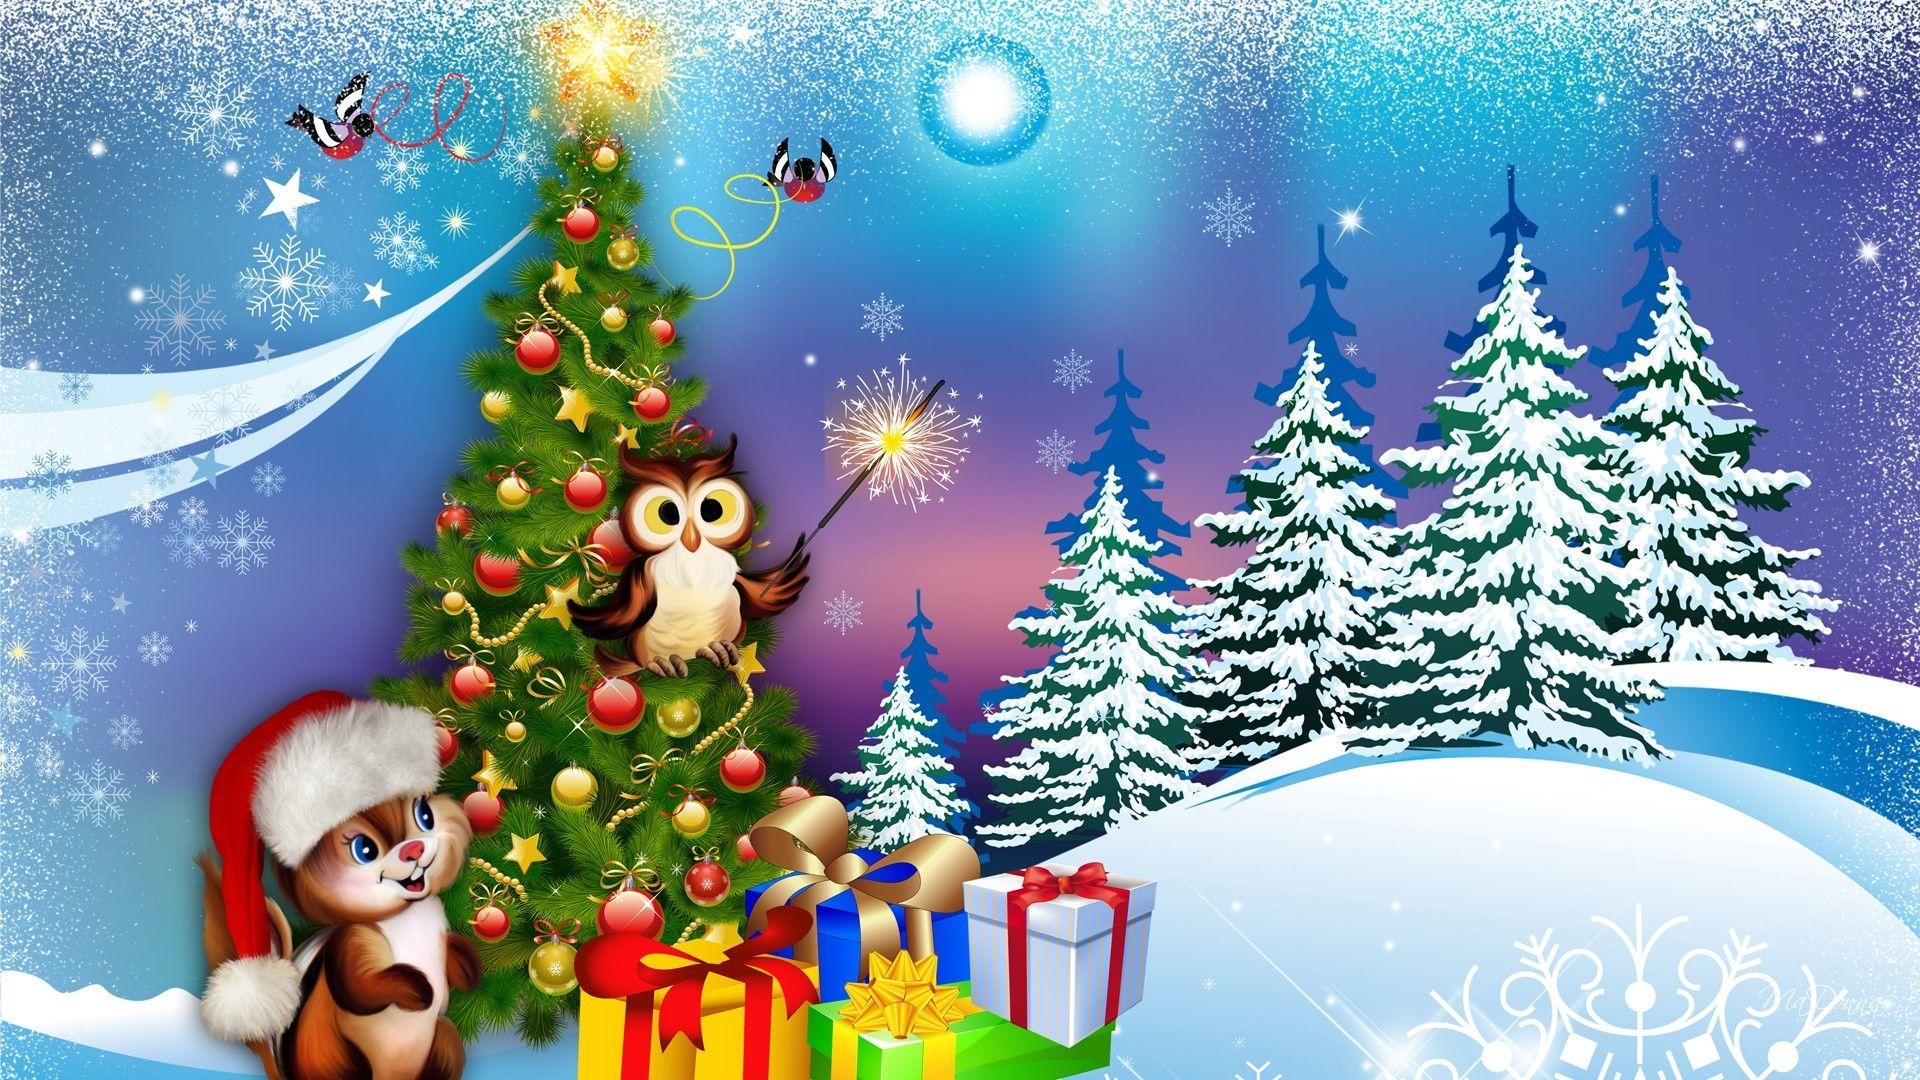 Presents Tag wallpaper: CHRISTMAS FOREVER Colorful Friendship